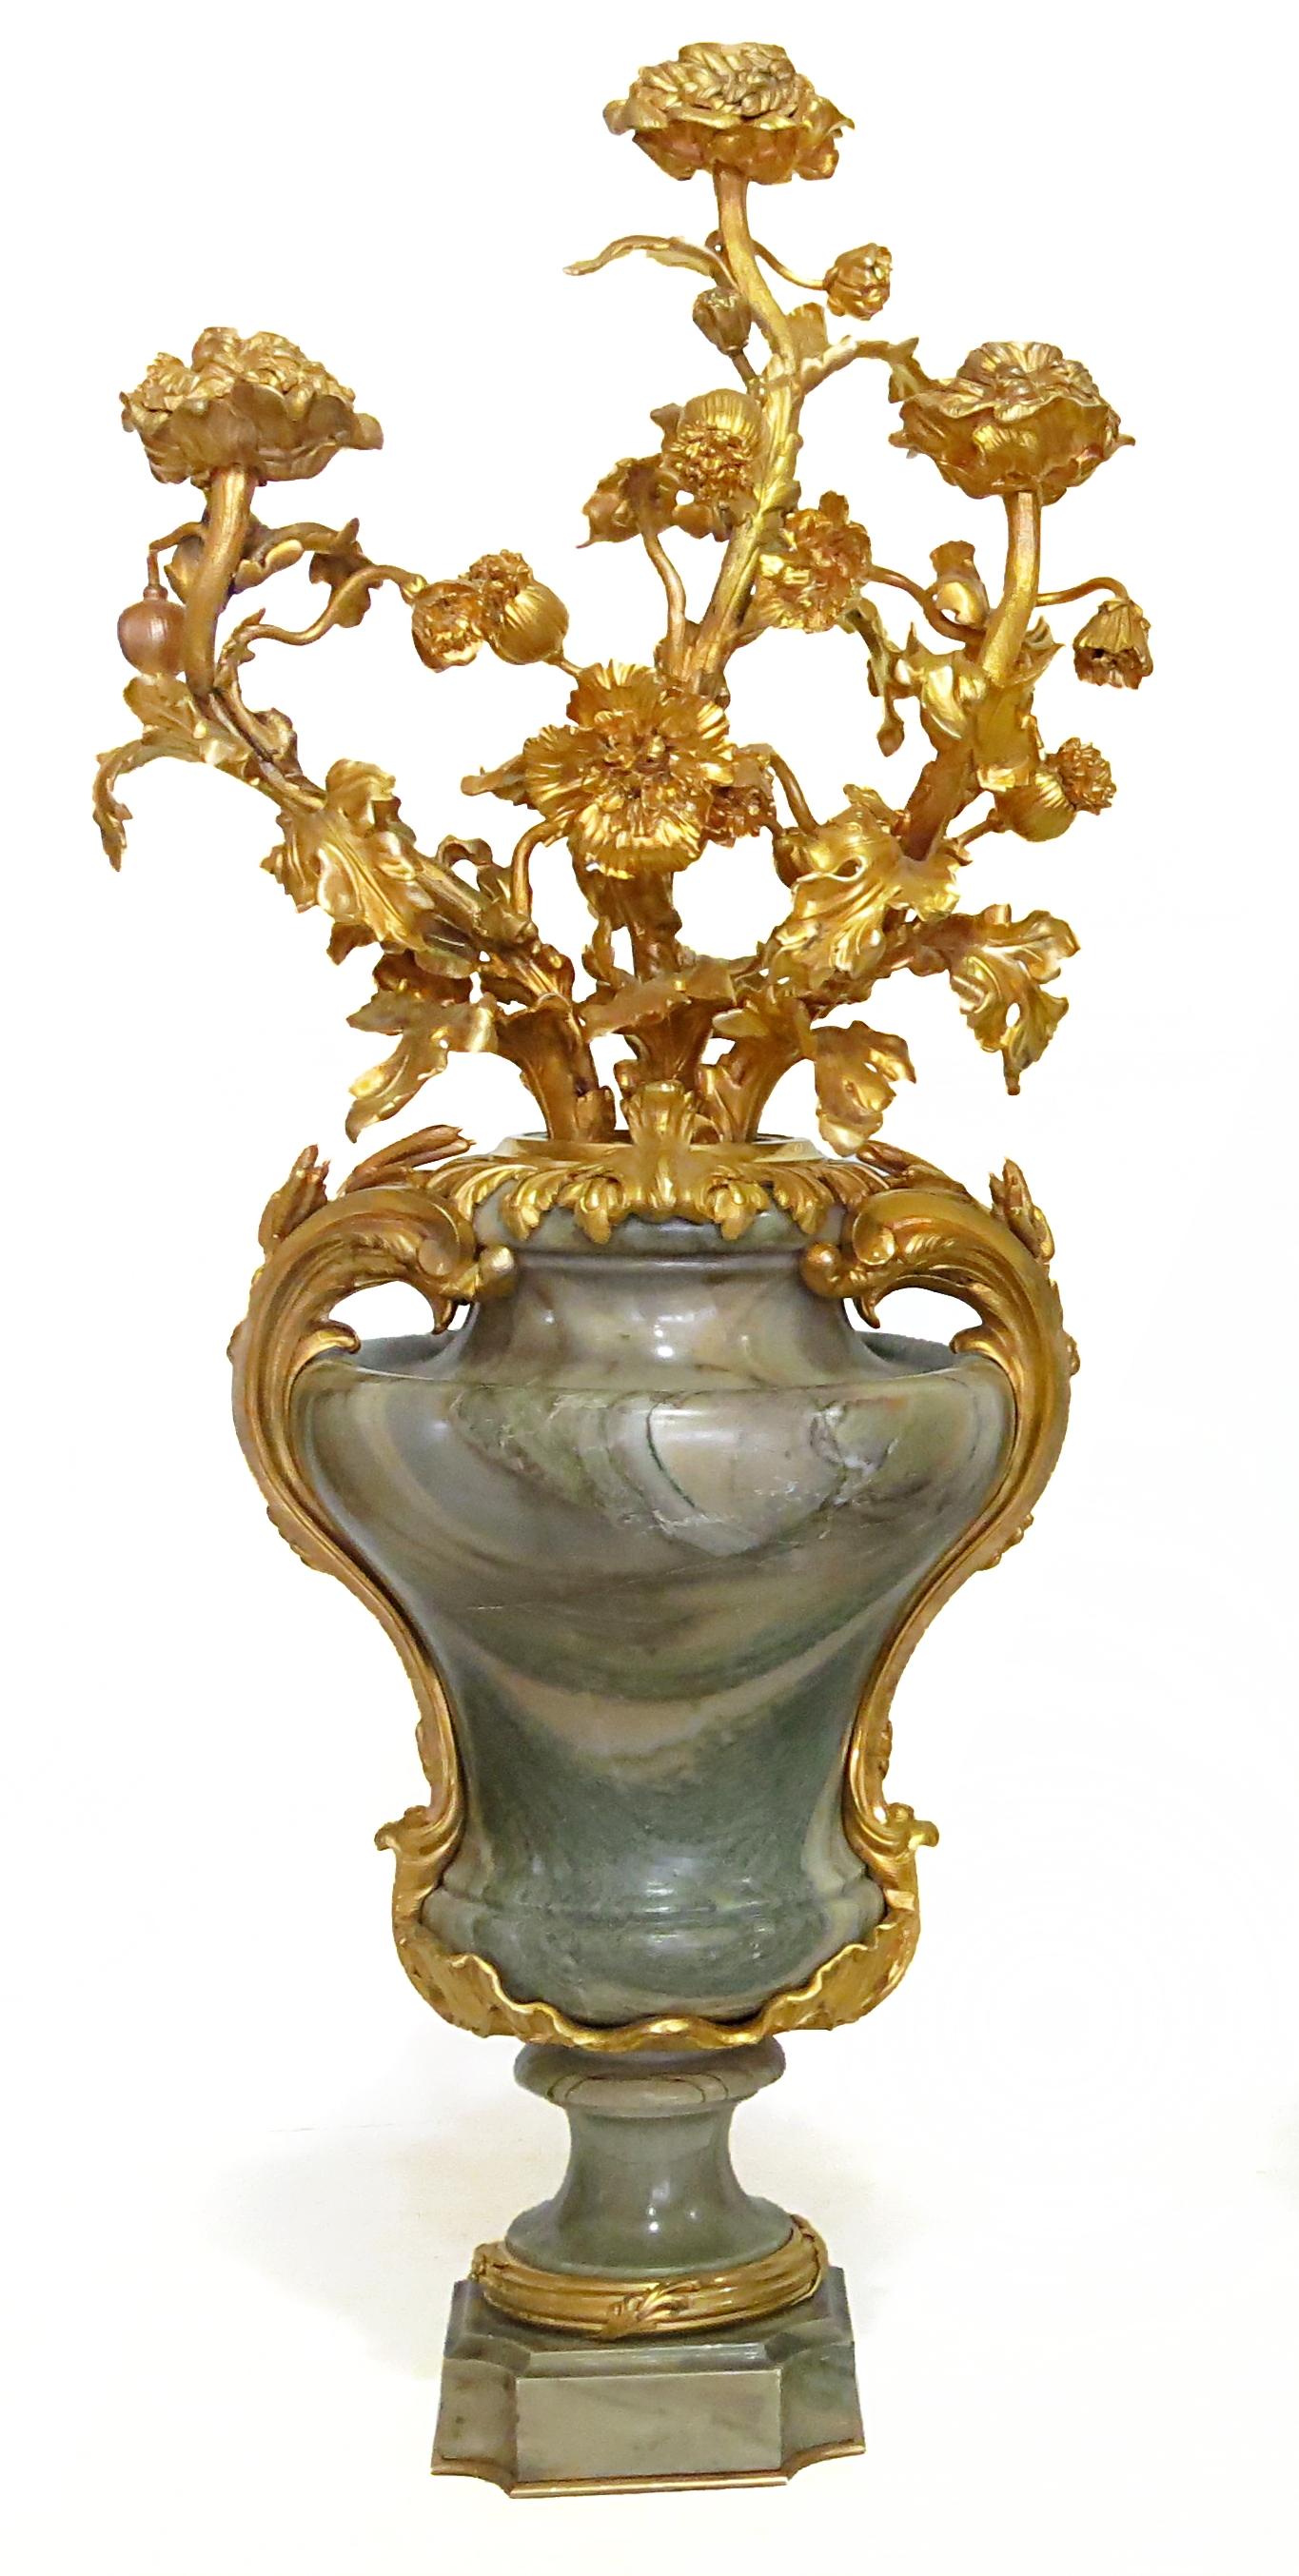 Large Cipolin marble vase topped with three light candelabras, last quarter of 19th century. gilt bronze mounted baluster vases, decorated with plants. High quality work, characteristic of Maison Millet in Paris. Cipolin marble is a variety of